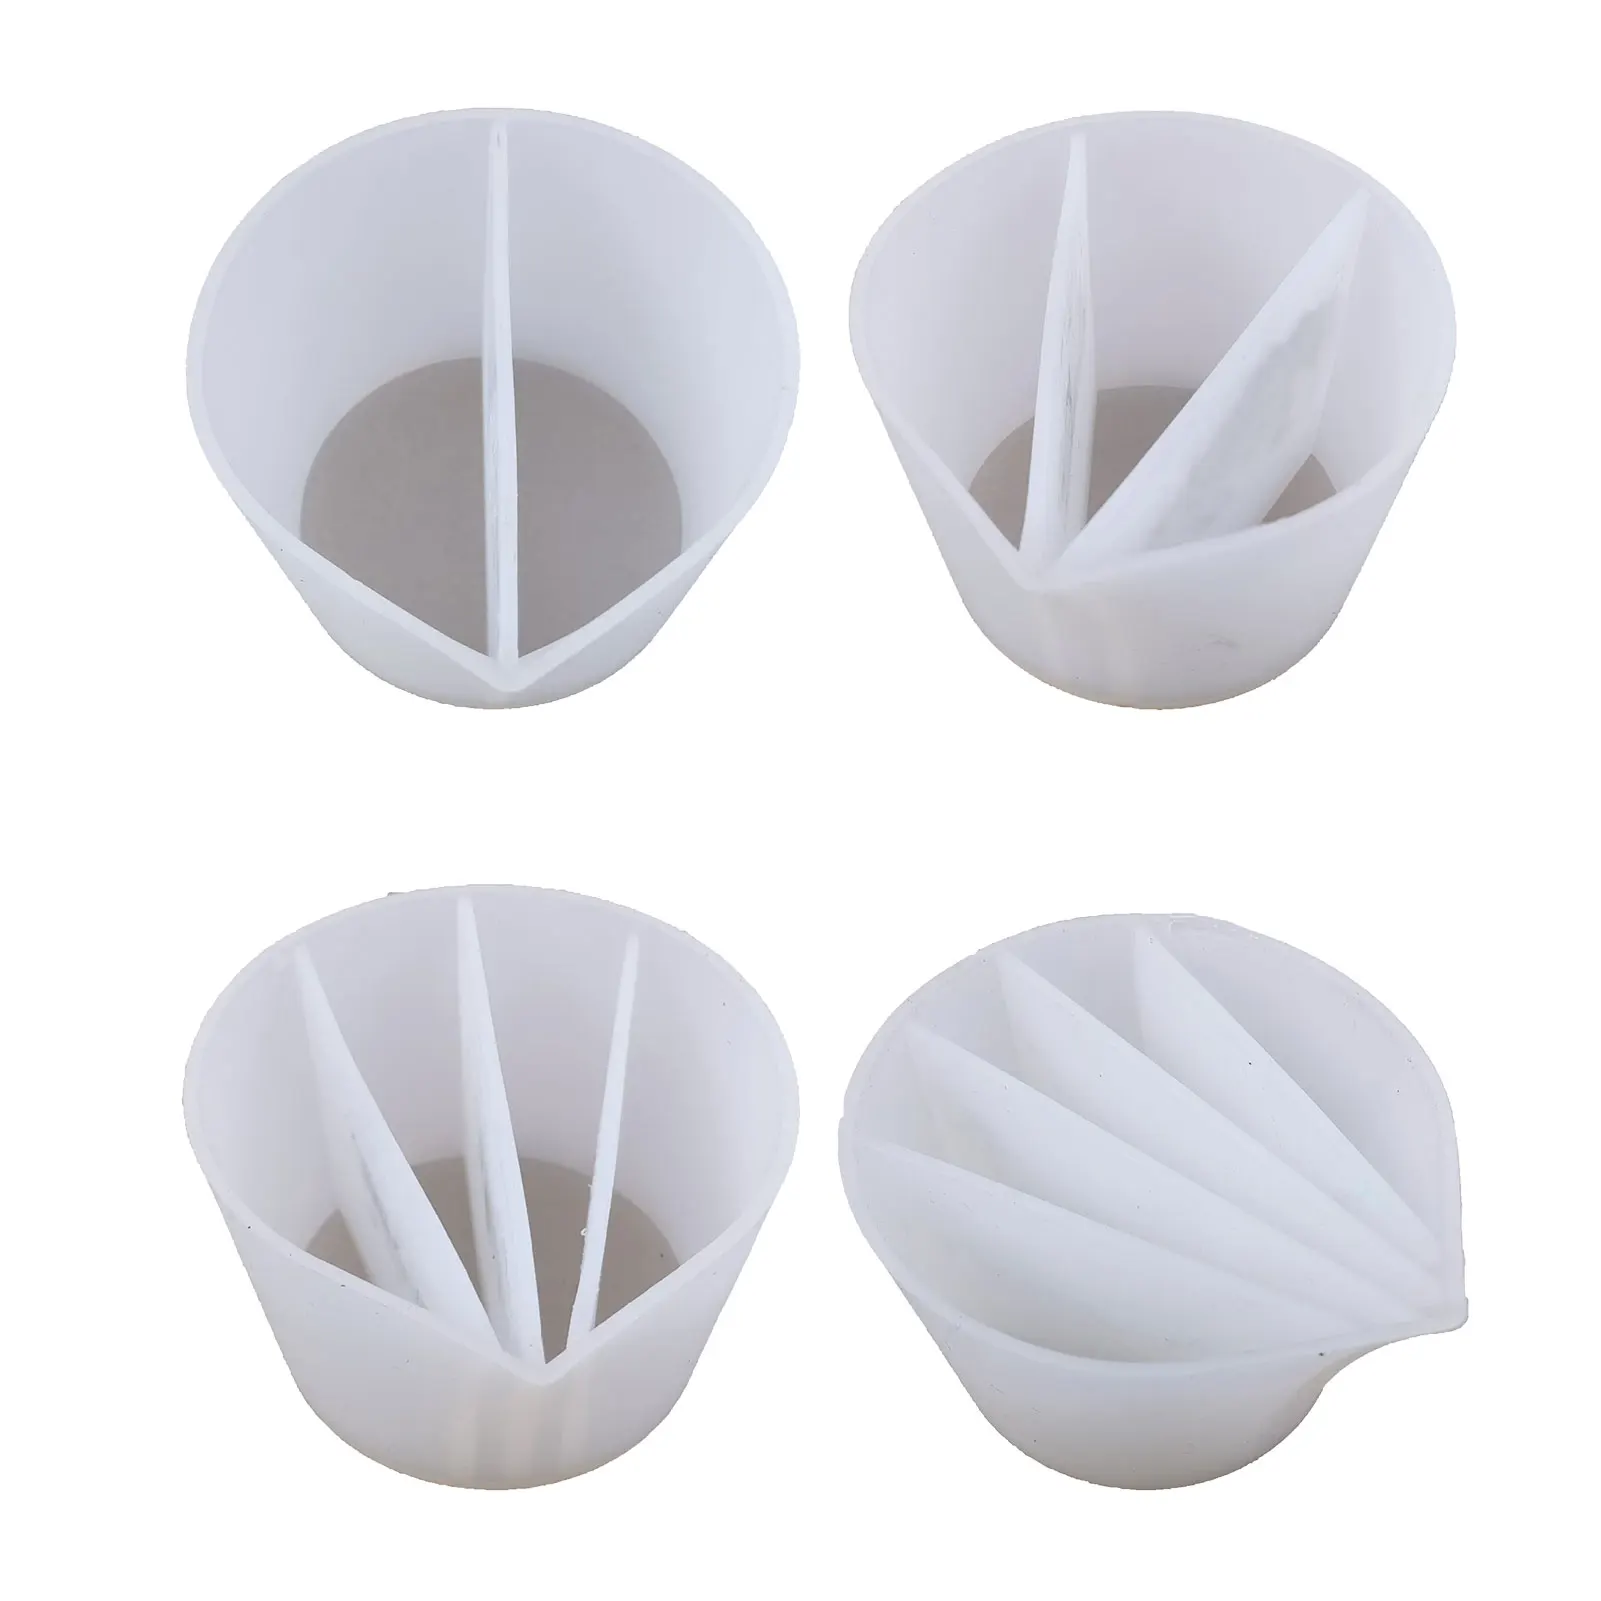 

4pcs/set Fluid Art 2 3 4 5 Channels Resin Tools Silicone Craft Split Cup For Paint Pouring Mixing Reusable Drawing DIY Dividers